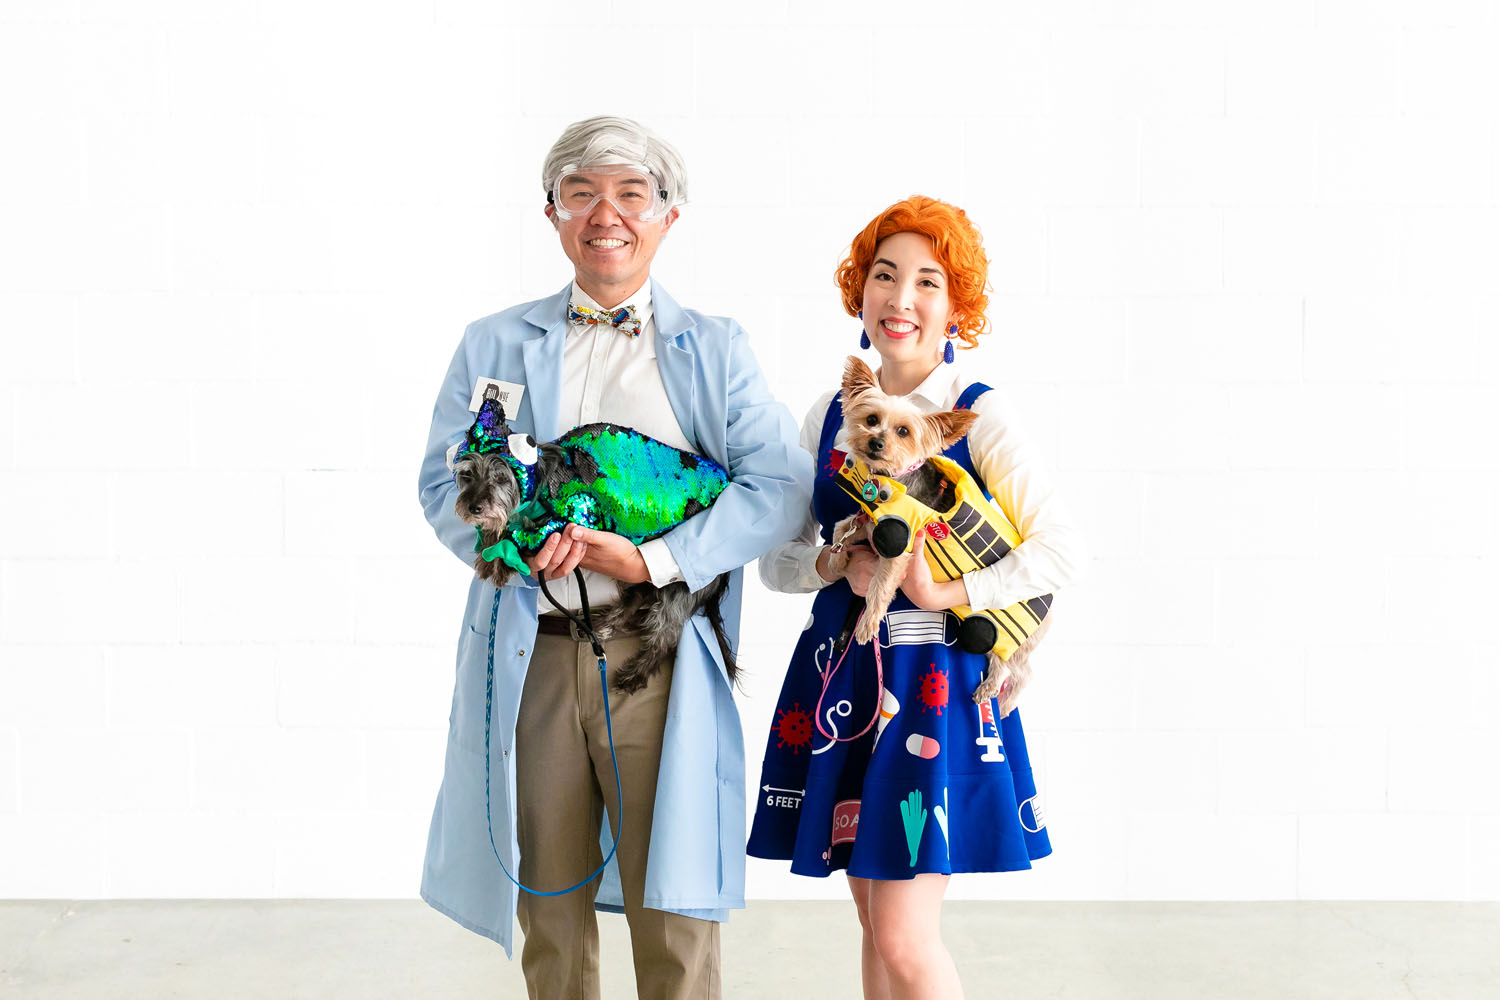 Couple dressed as Bill Nye and Ms. Frizzle. Dogs dressed as chameleon and school bus. Part of Magic School Bus costume.